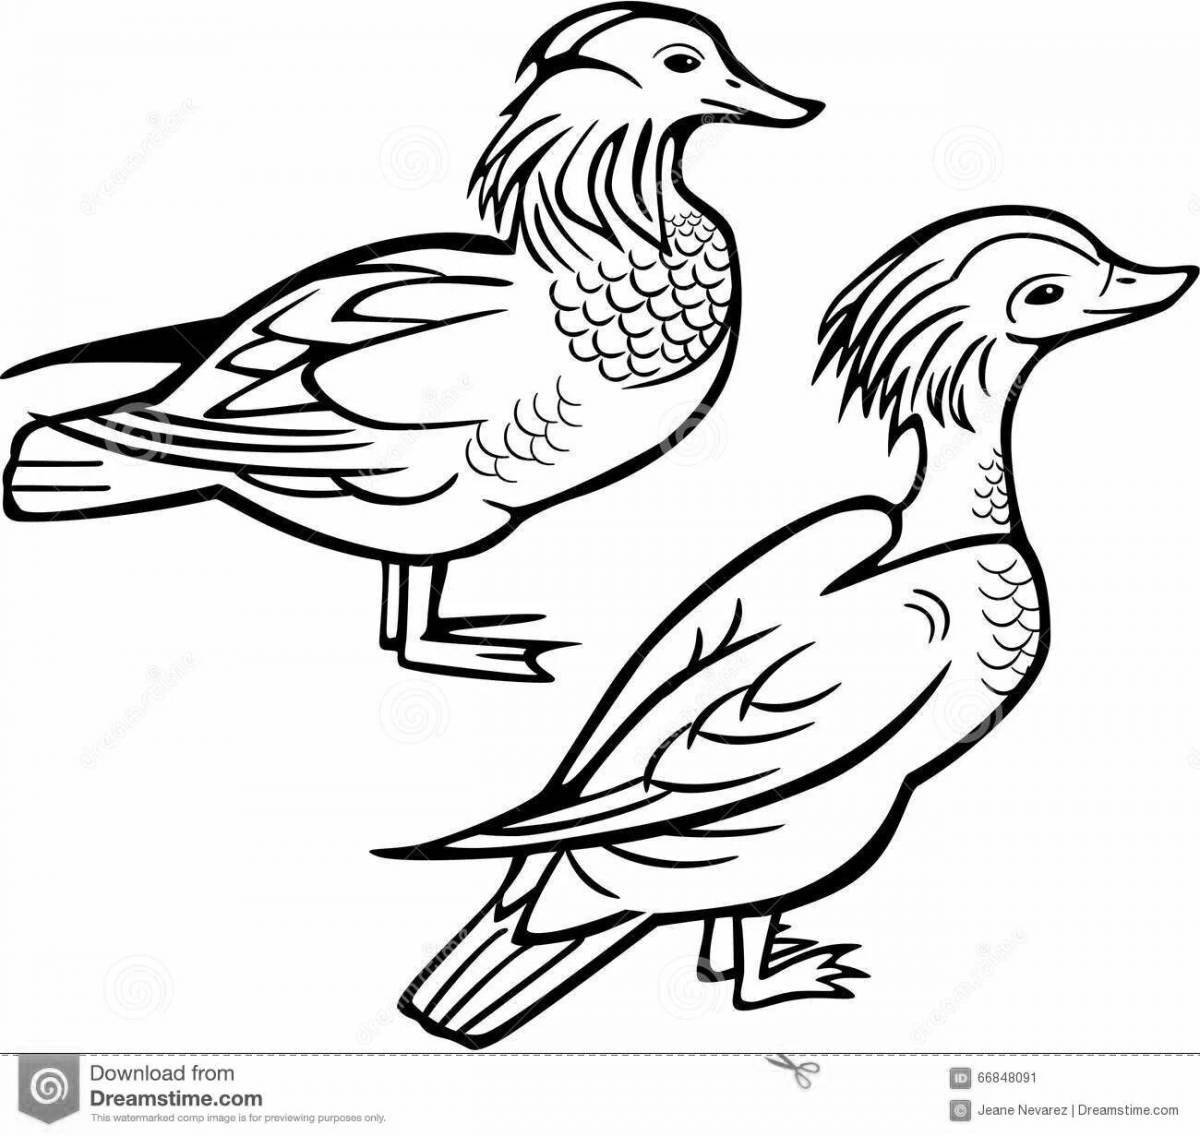 Awesome mandarin duck coloring book for kids